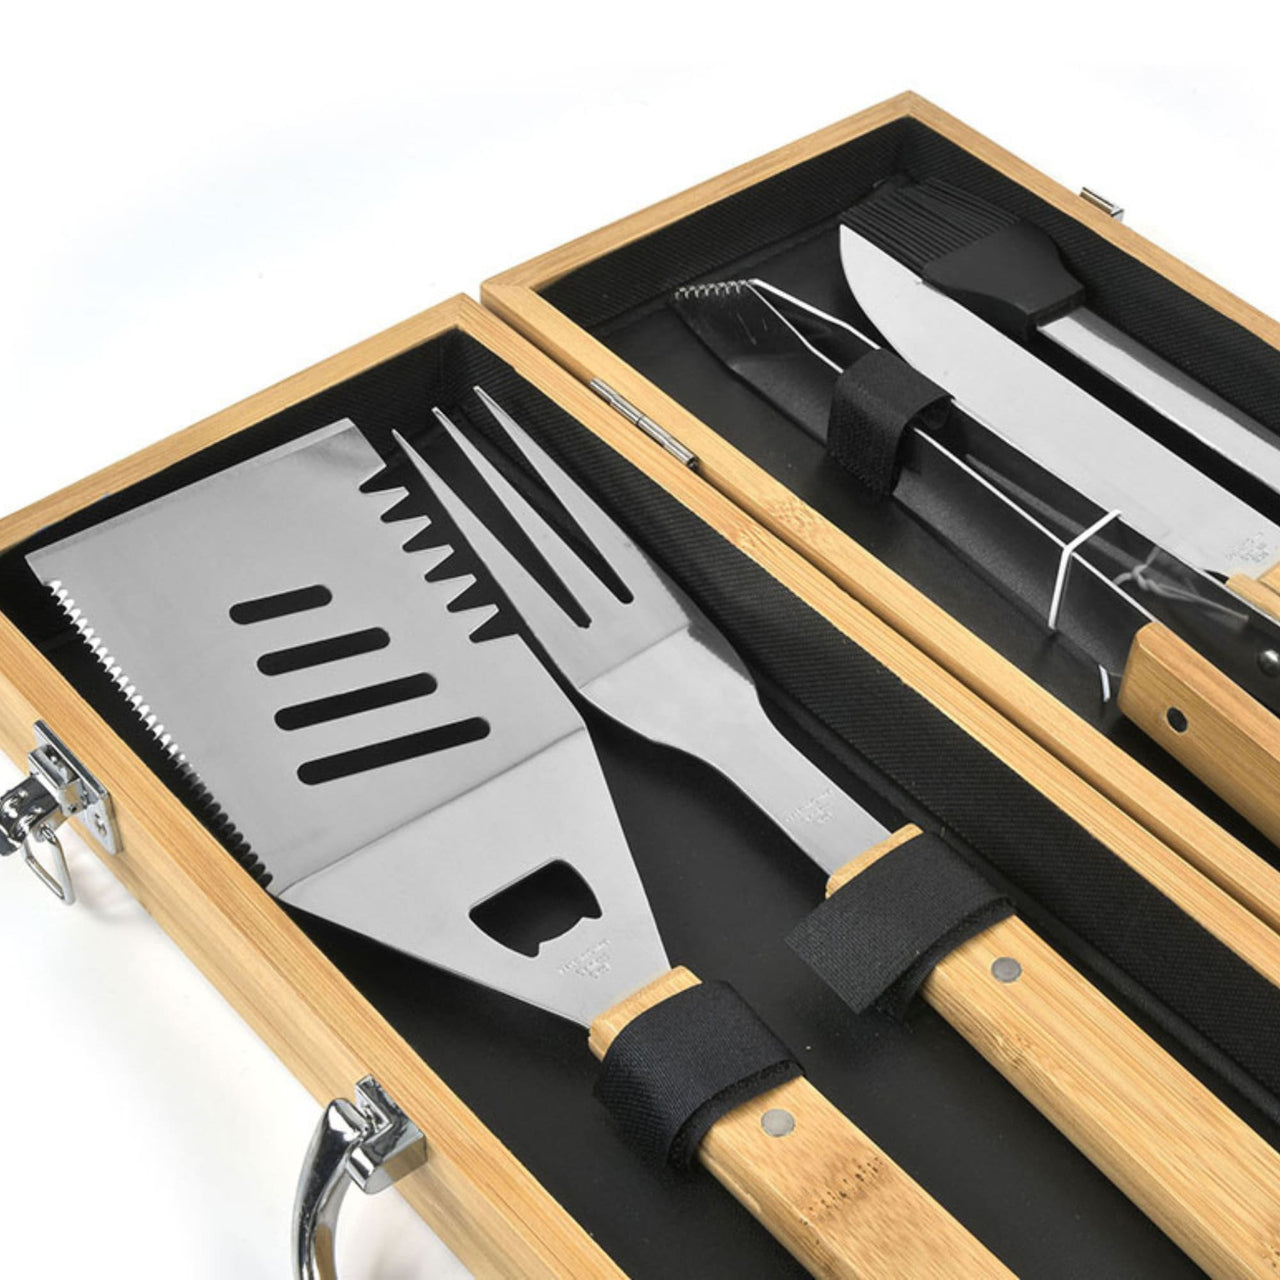 Personalized Grill Master 5-Piece BBQ Gift Set